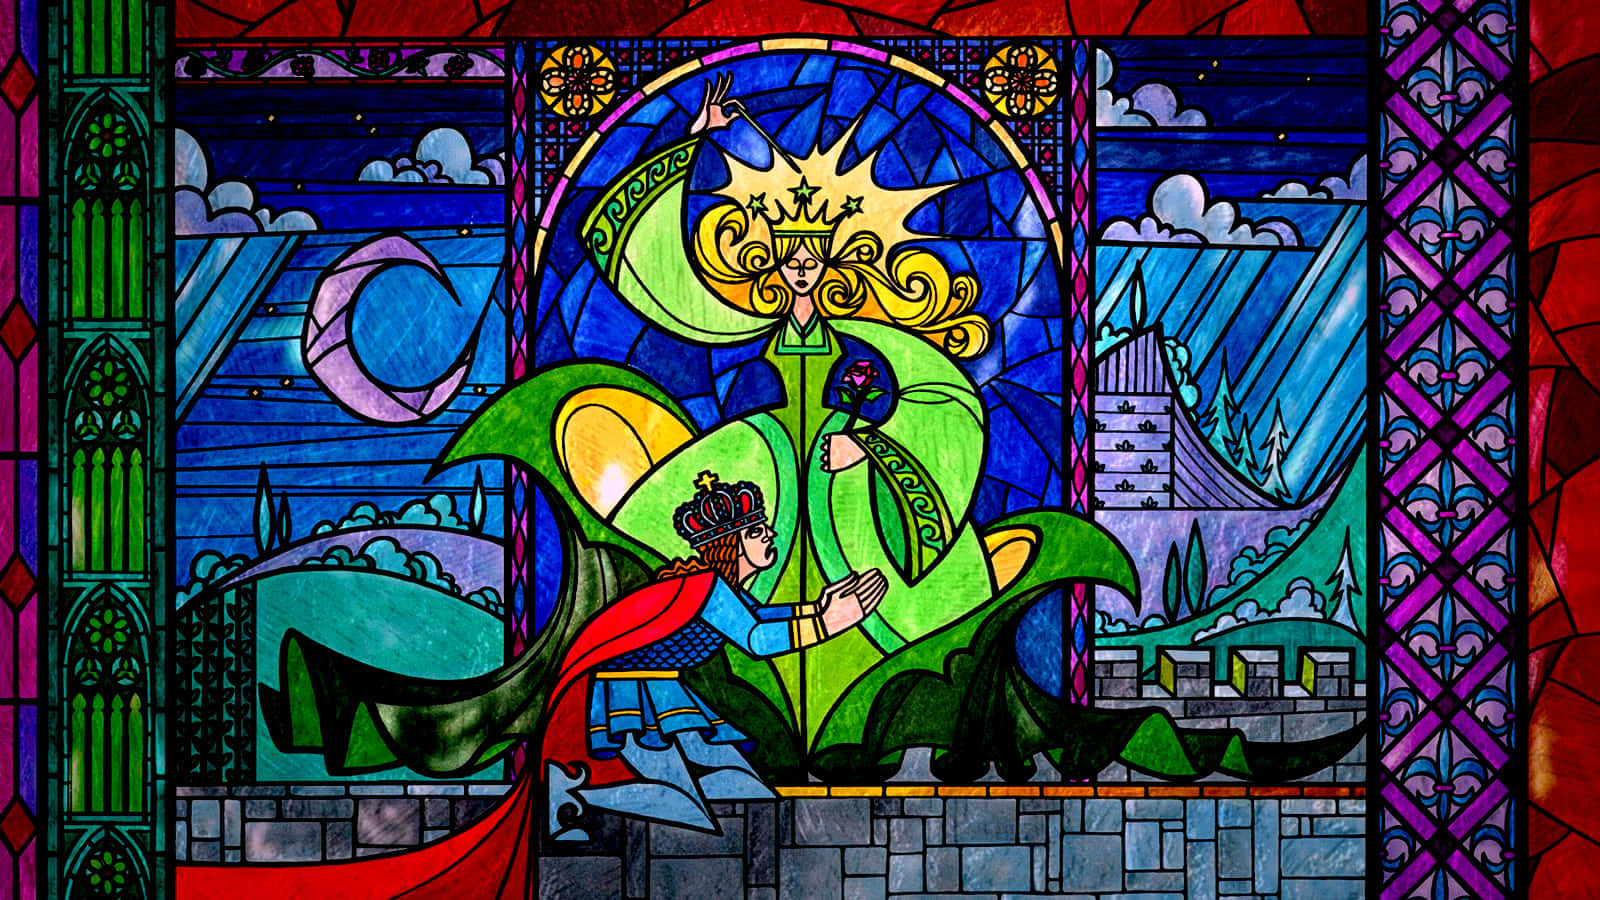 A Close-Up of a Colorful Stained Glass Window